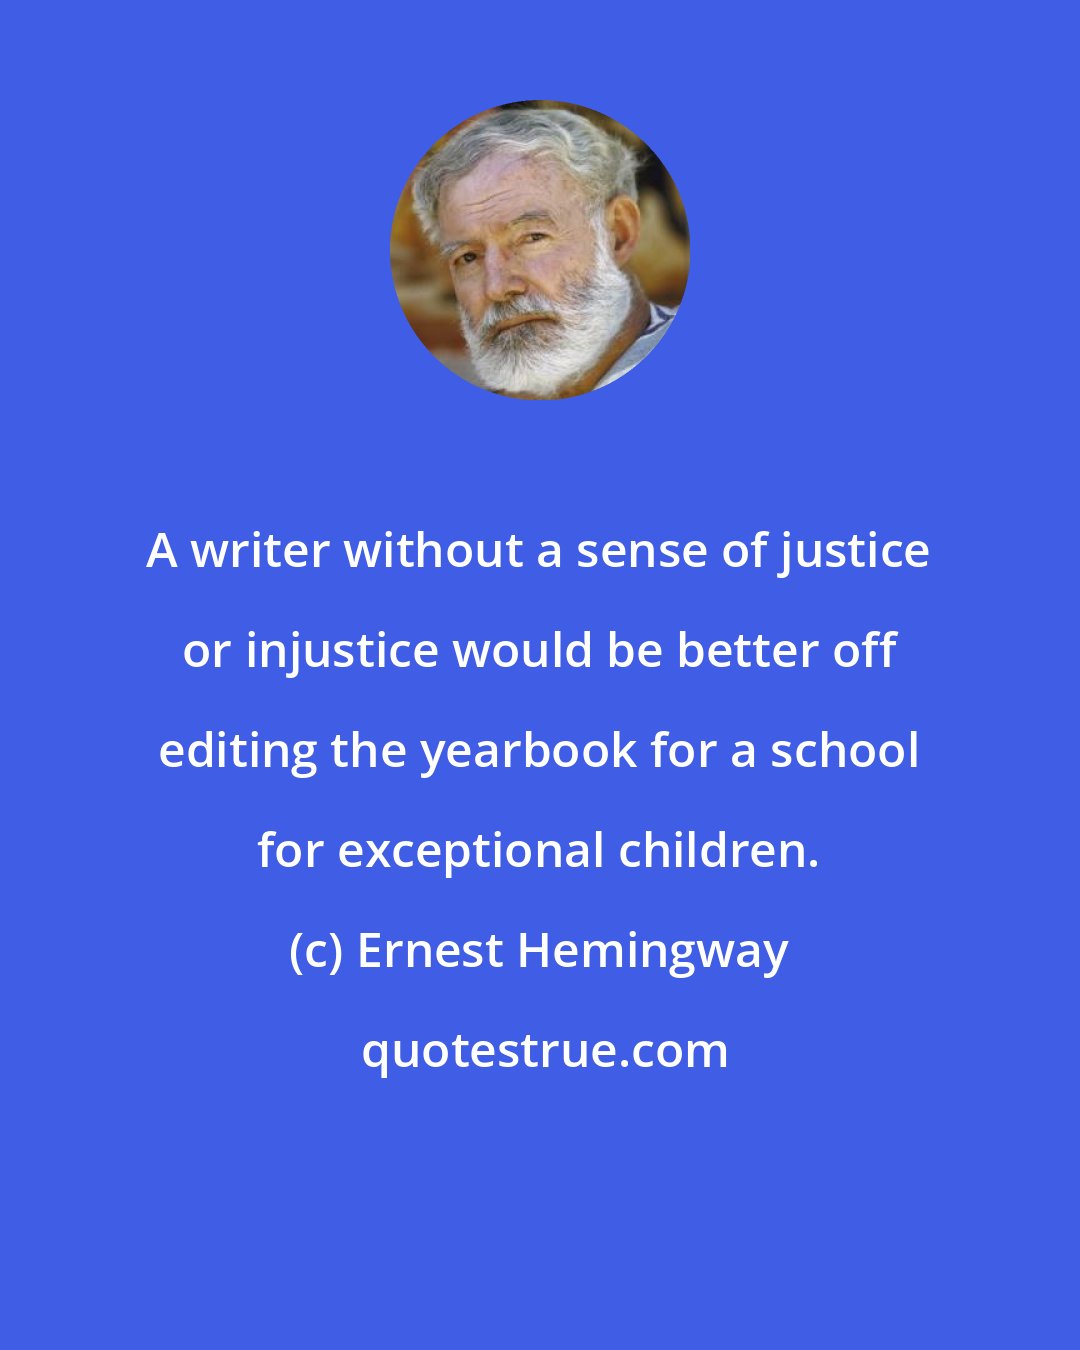 Ernest Hemingway: A writer without a sense of justice or injustice would be better off editing the yearbook for a school for exceptional children.